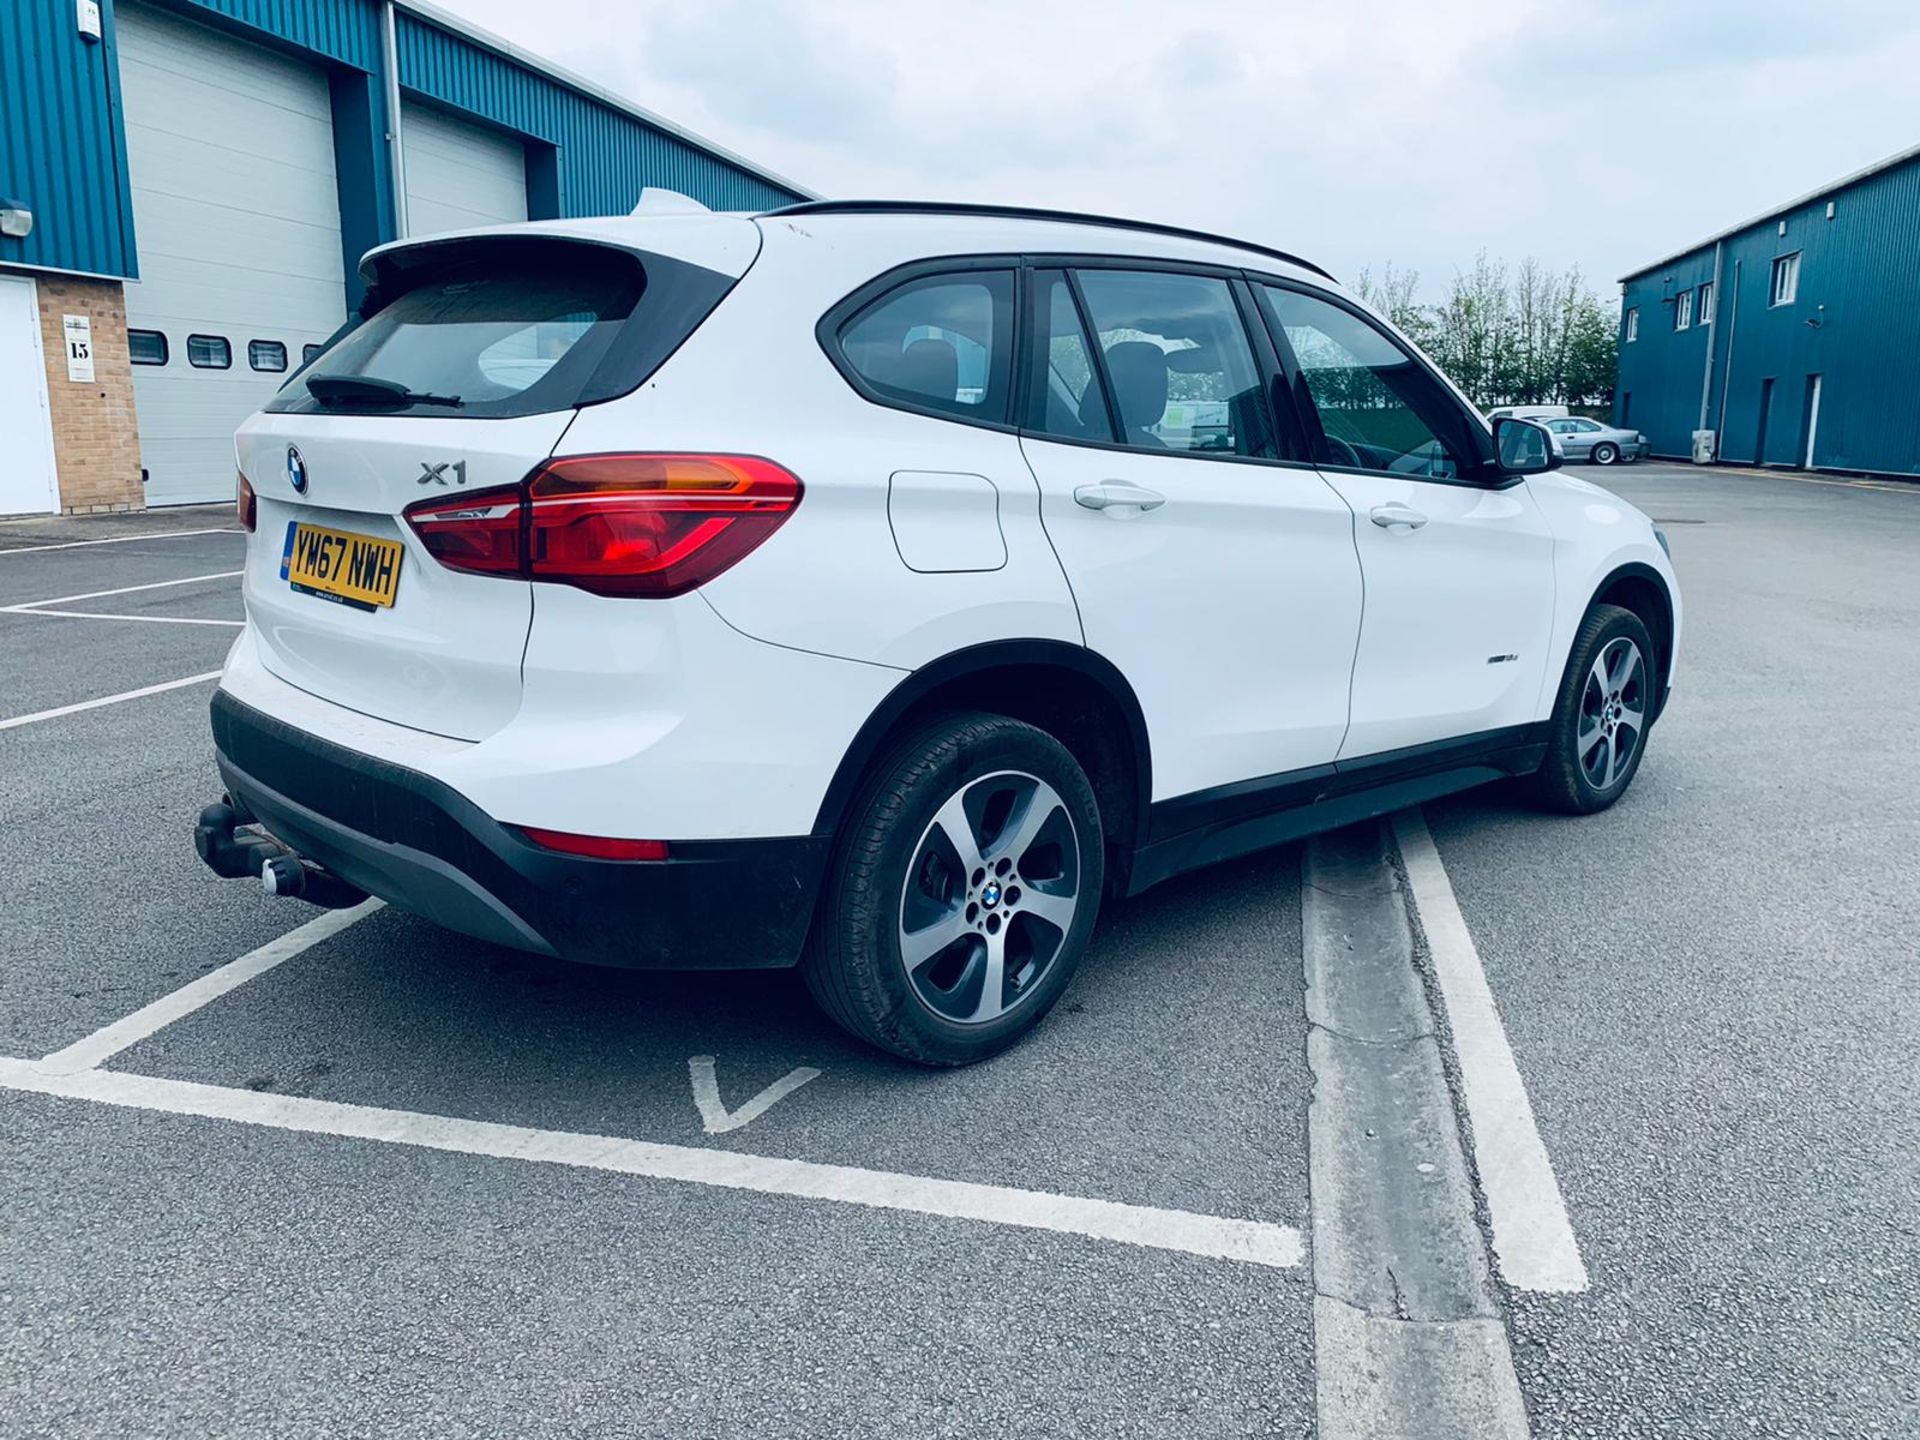 BMW X1 sDrive 2.0d Special Equipment Auto - 2018 Reg - Service History - 1 Owner From New - Image 8 of 25